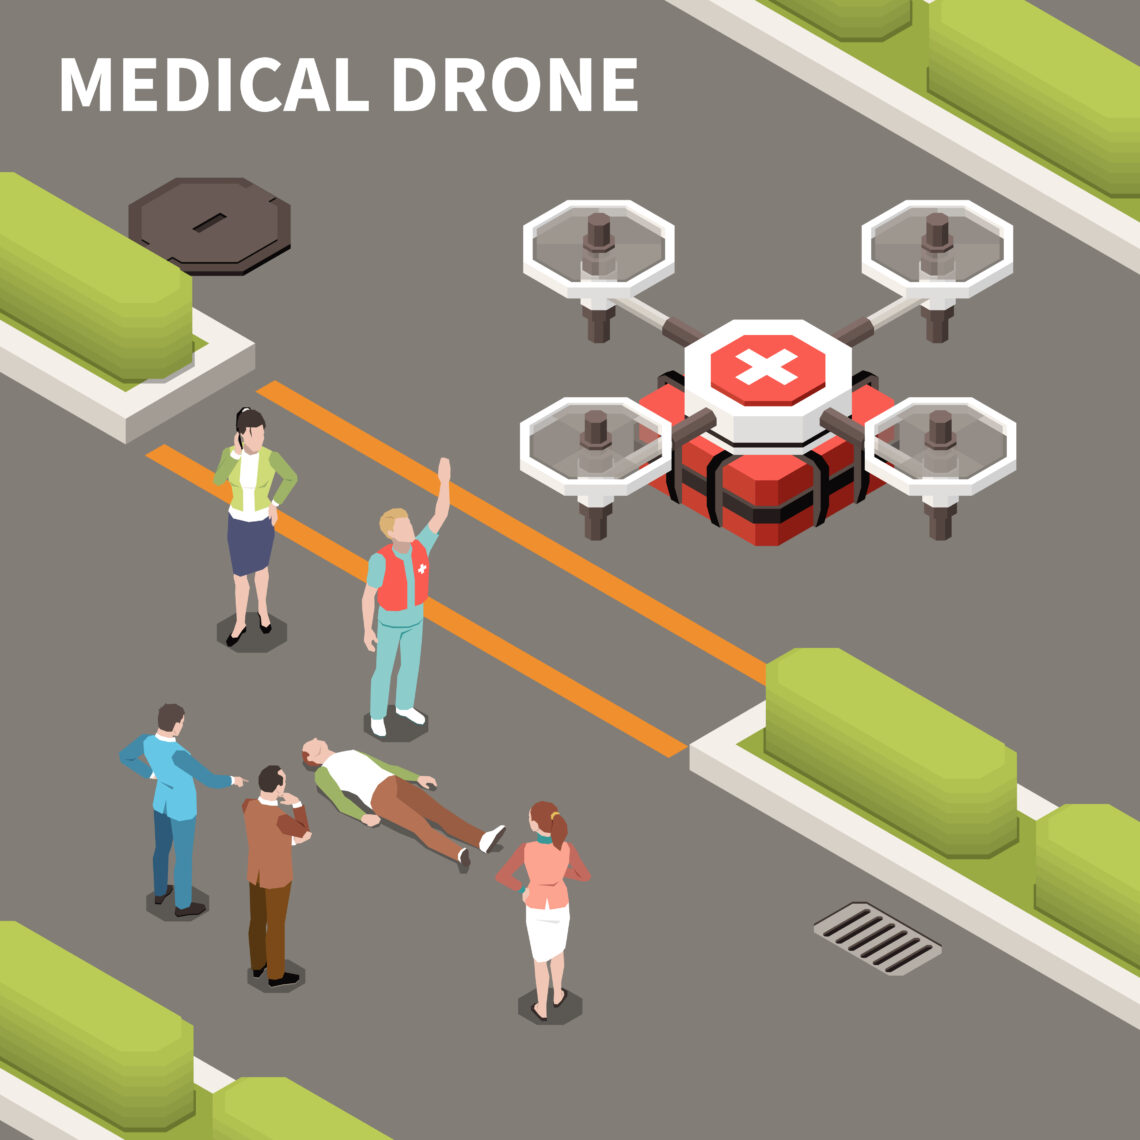 What to know about drone medication deliveries